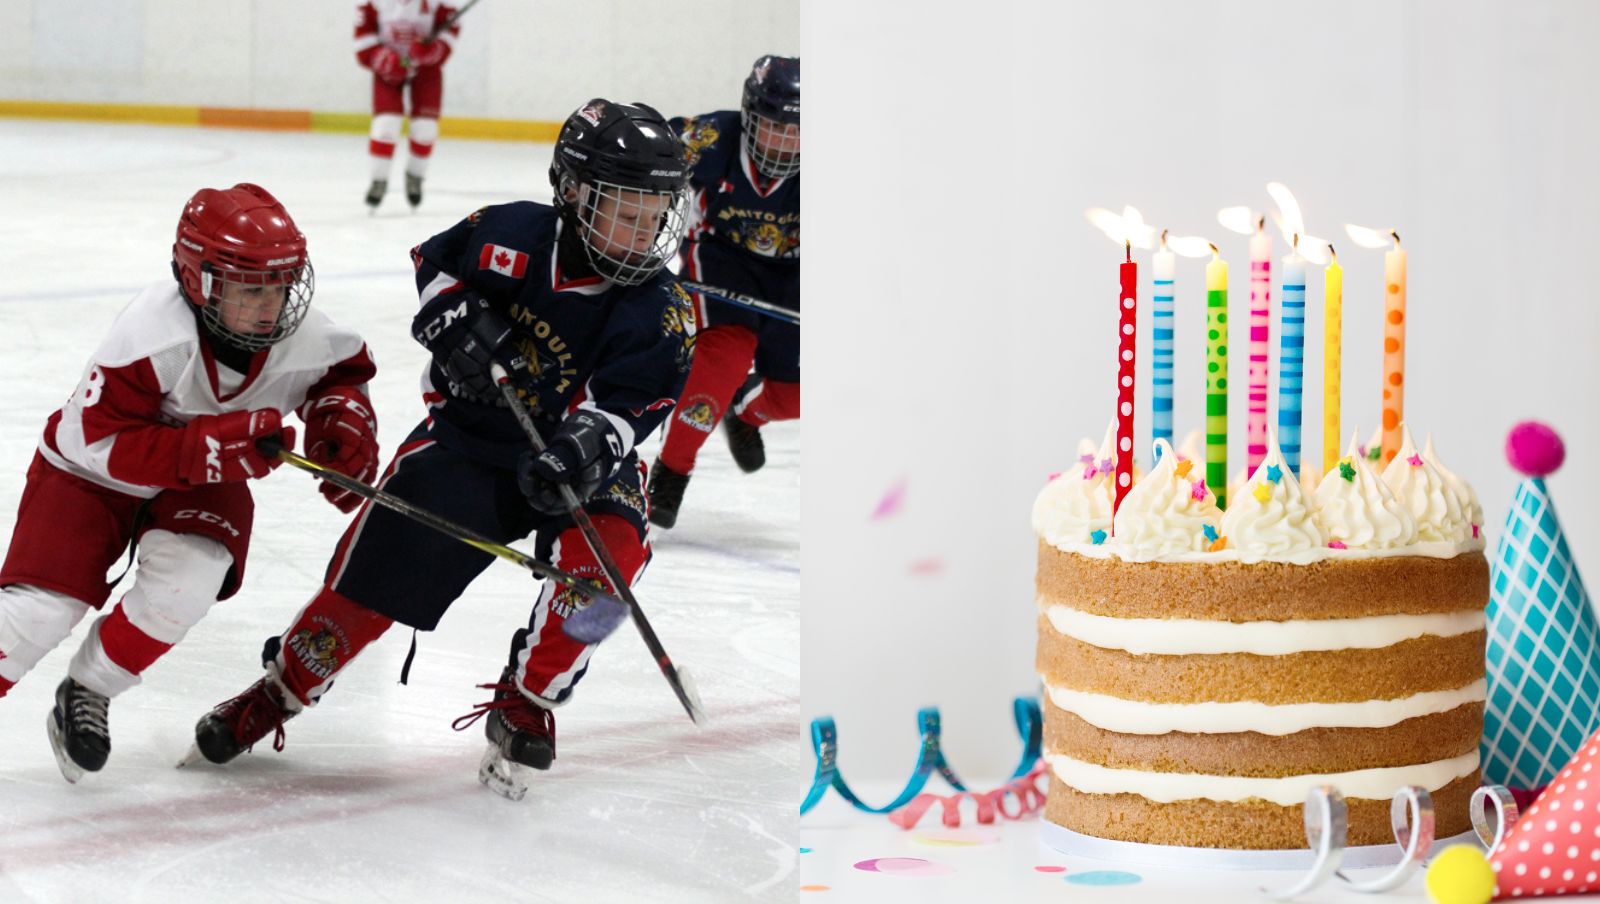 Children playing ice hockey on one side, a birthday cake on the other side.